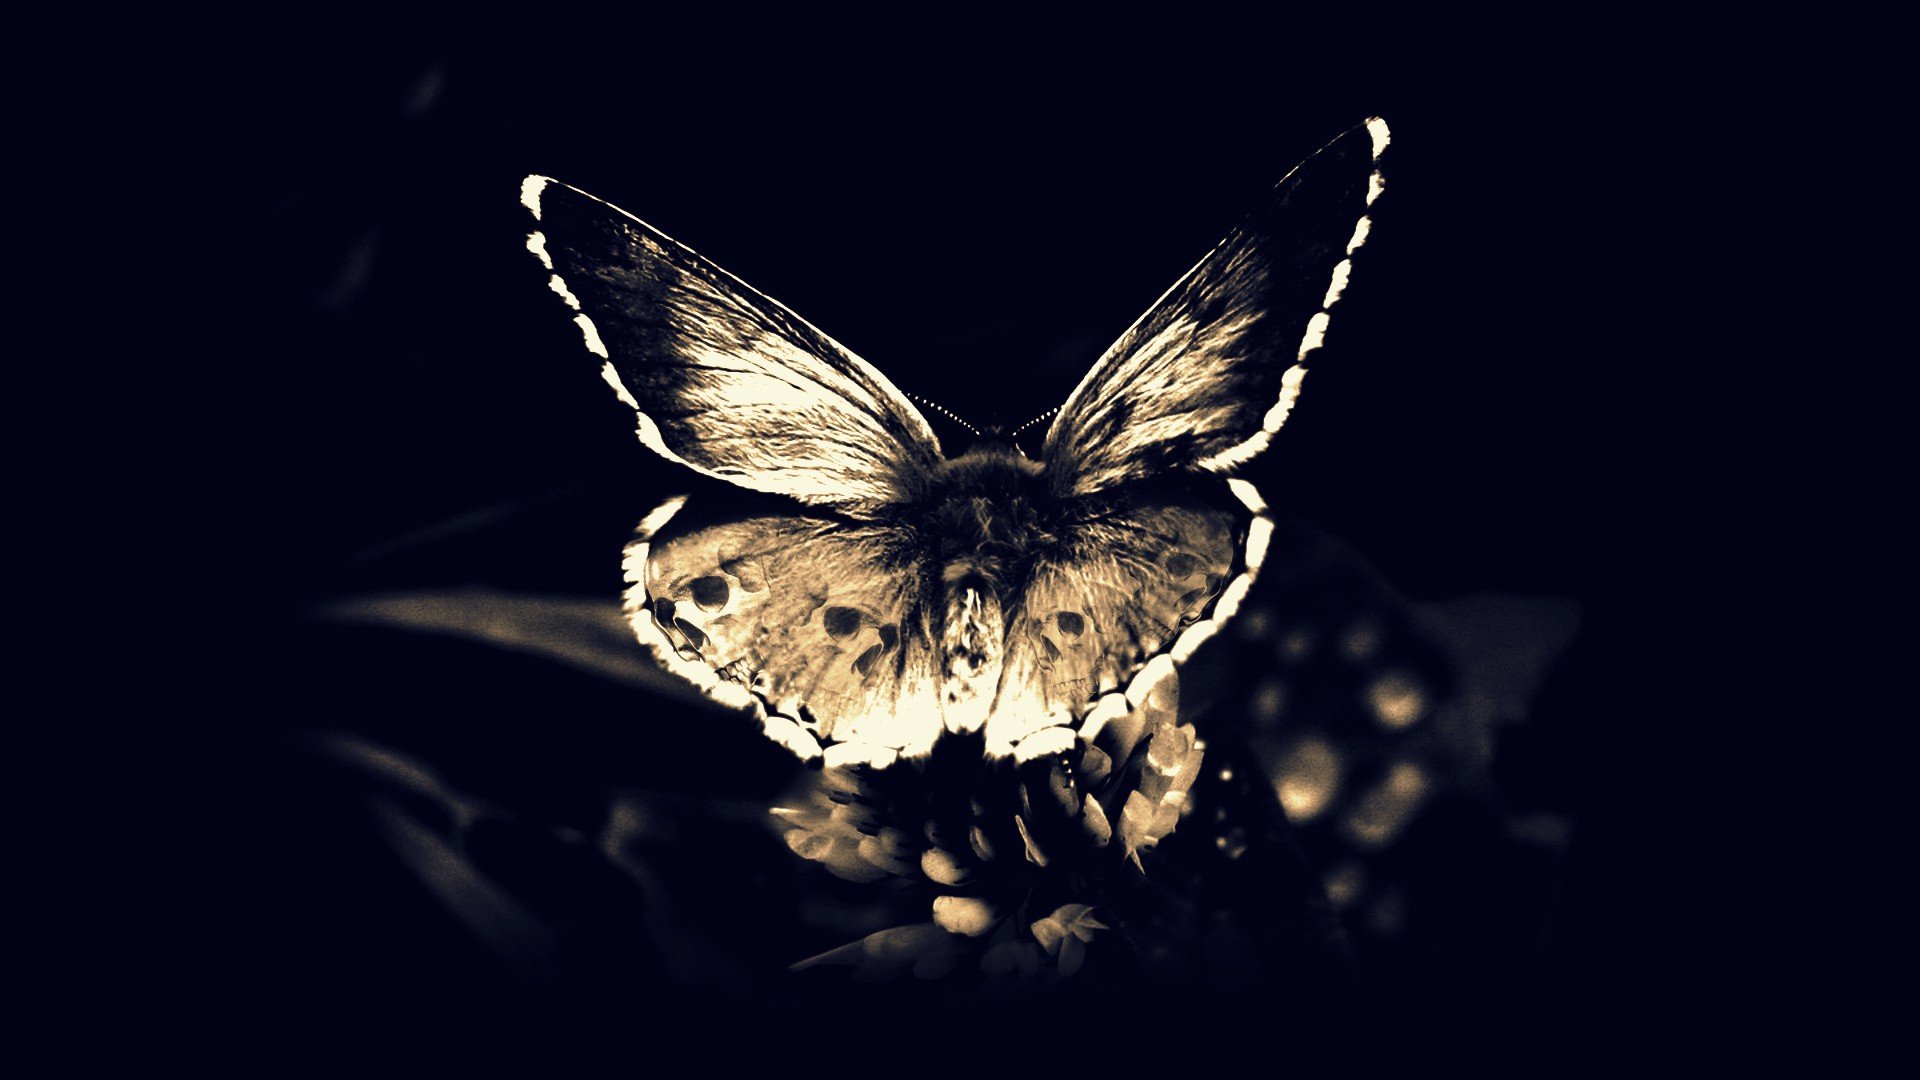 skulls, Death, Fly, Gothic, Darkness, Moths, Butterfly, Wings